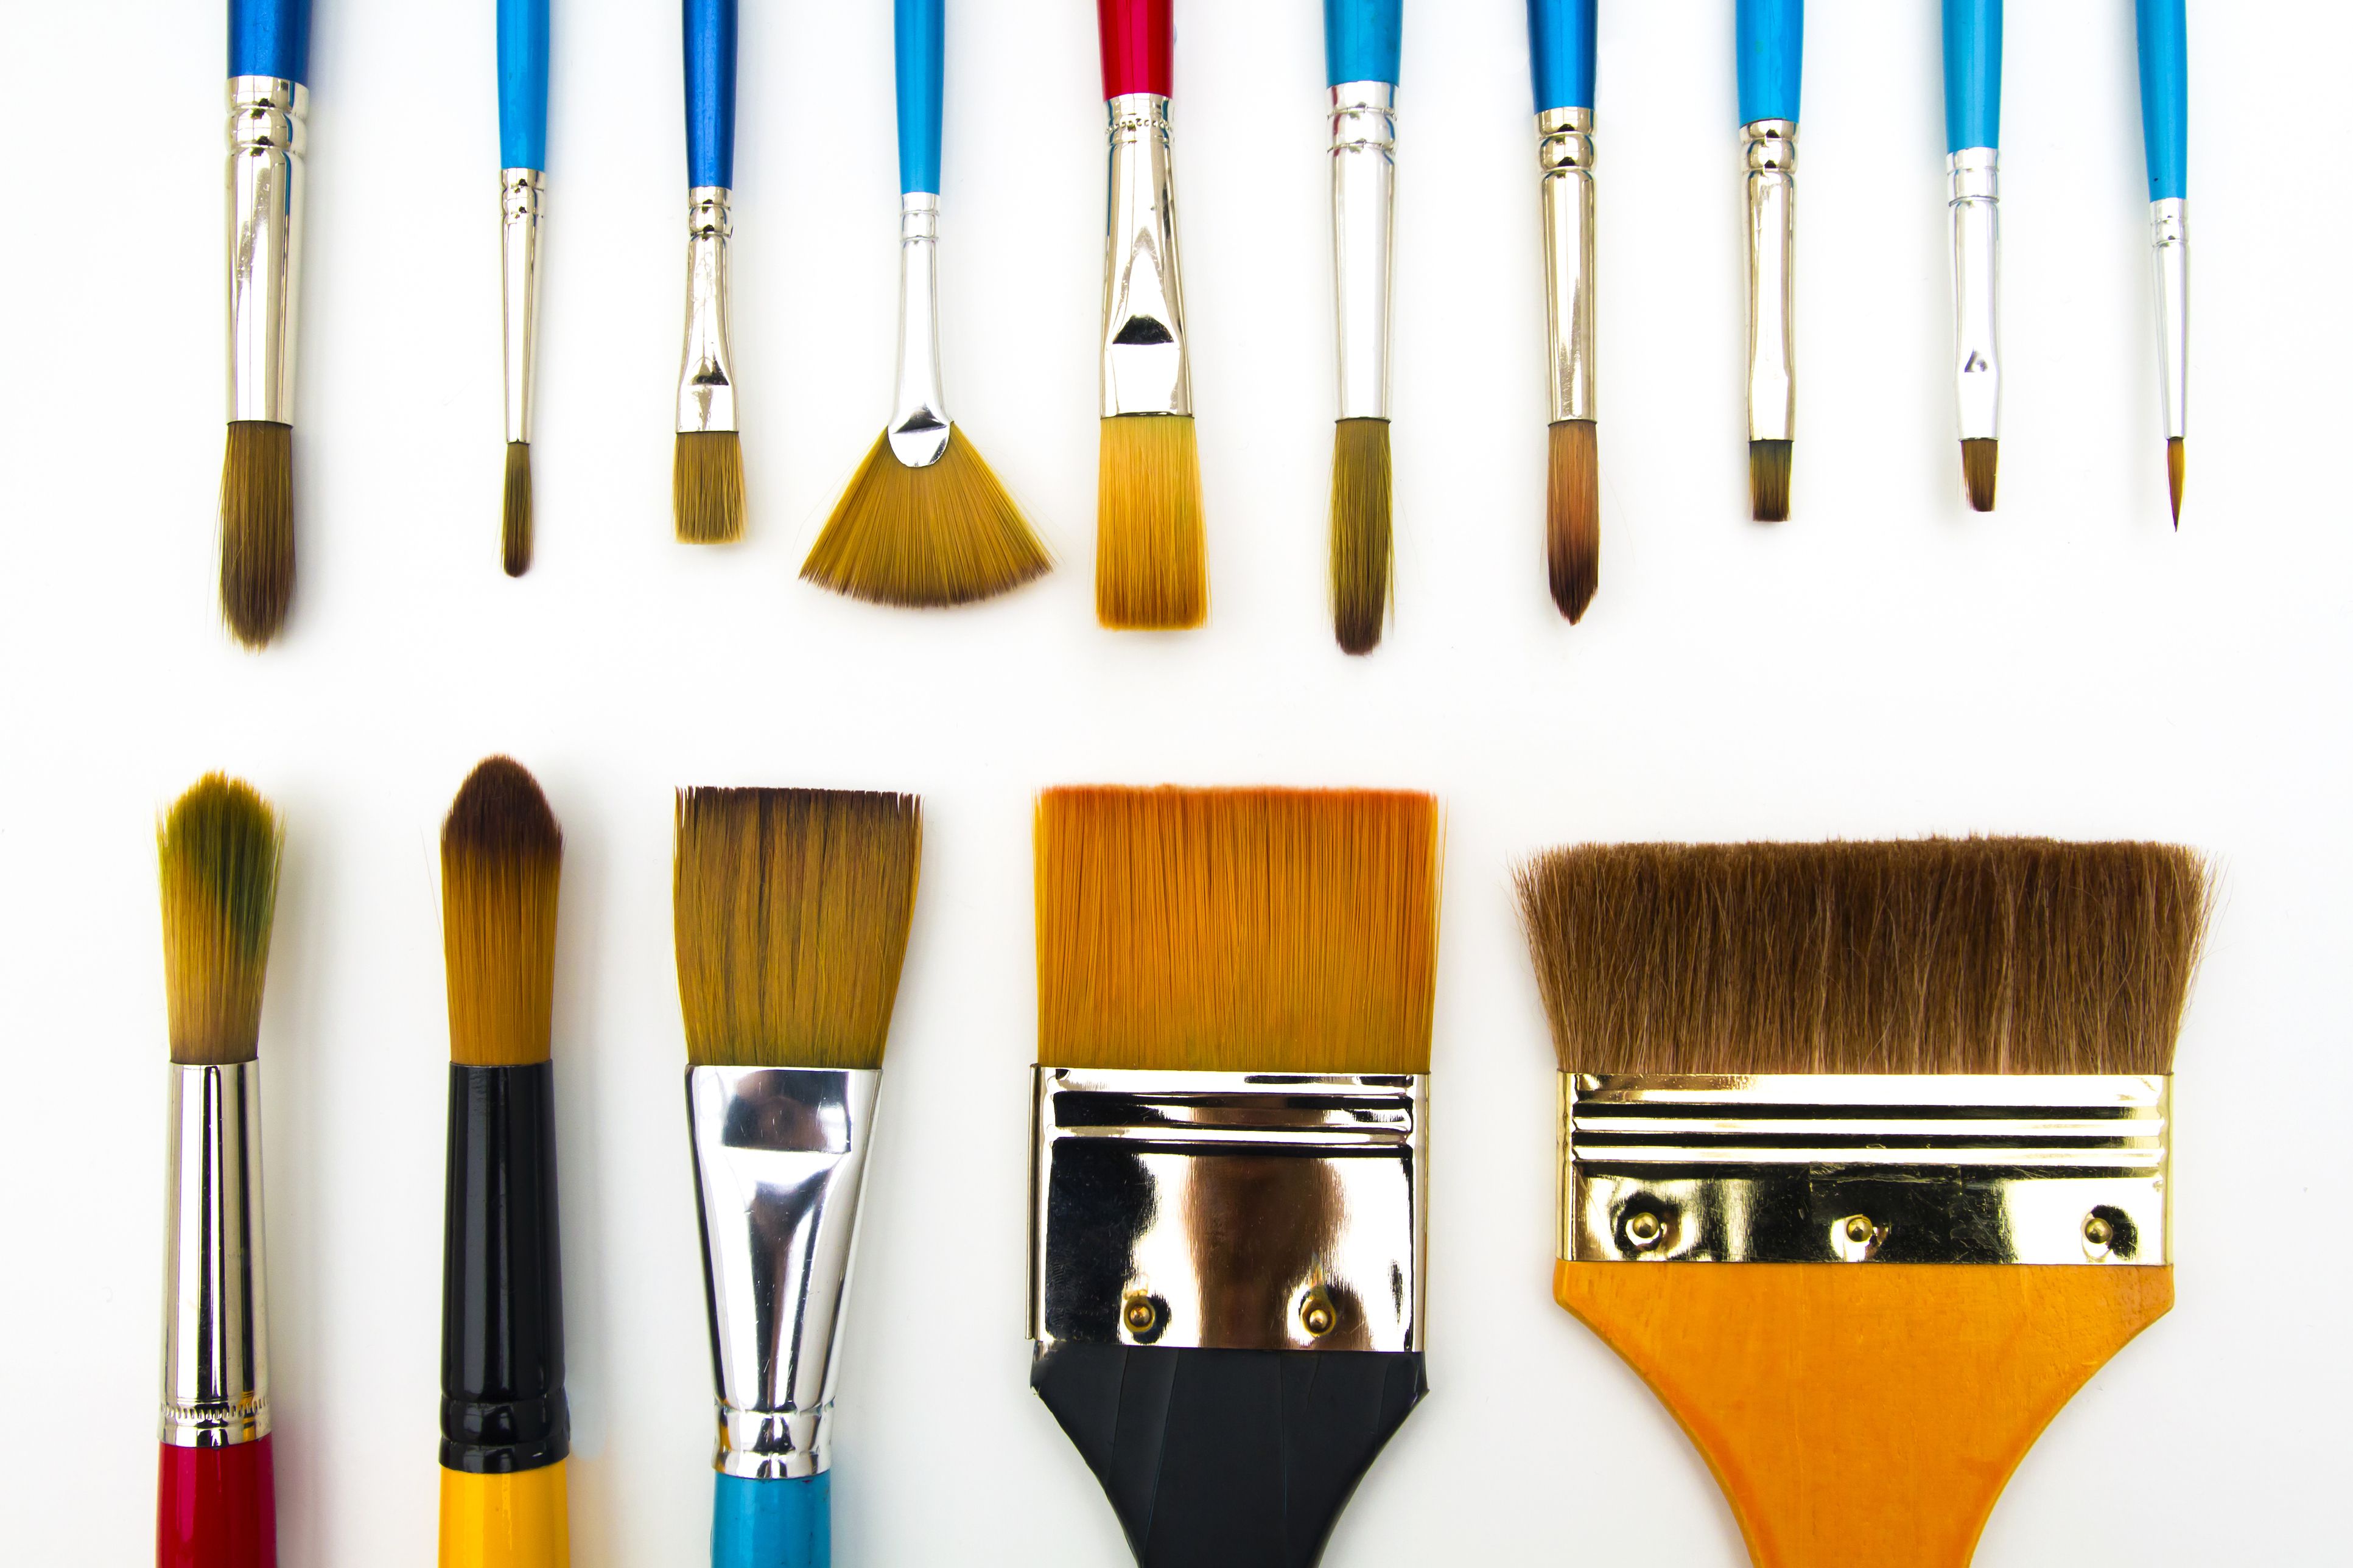 Types and Shapes of Art Paint Brushes